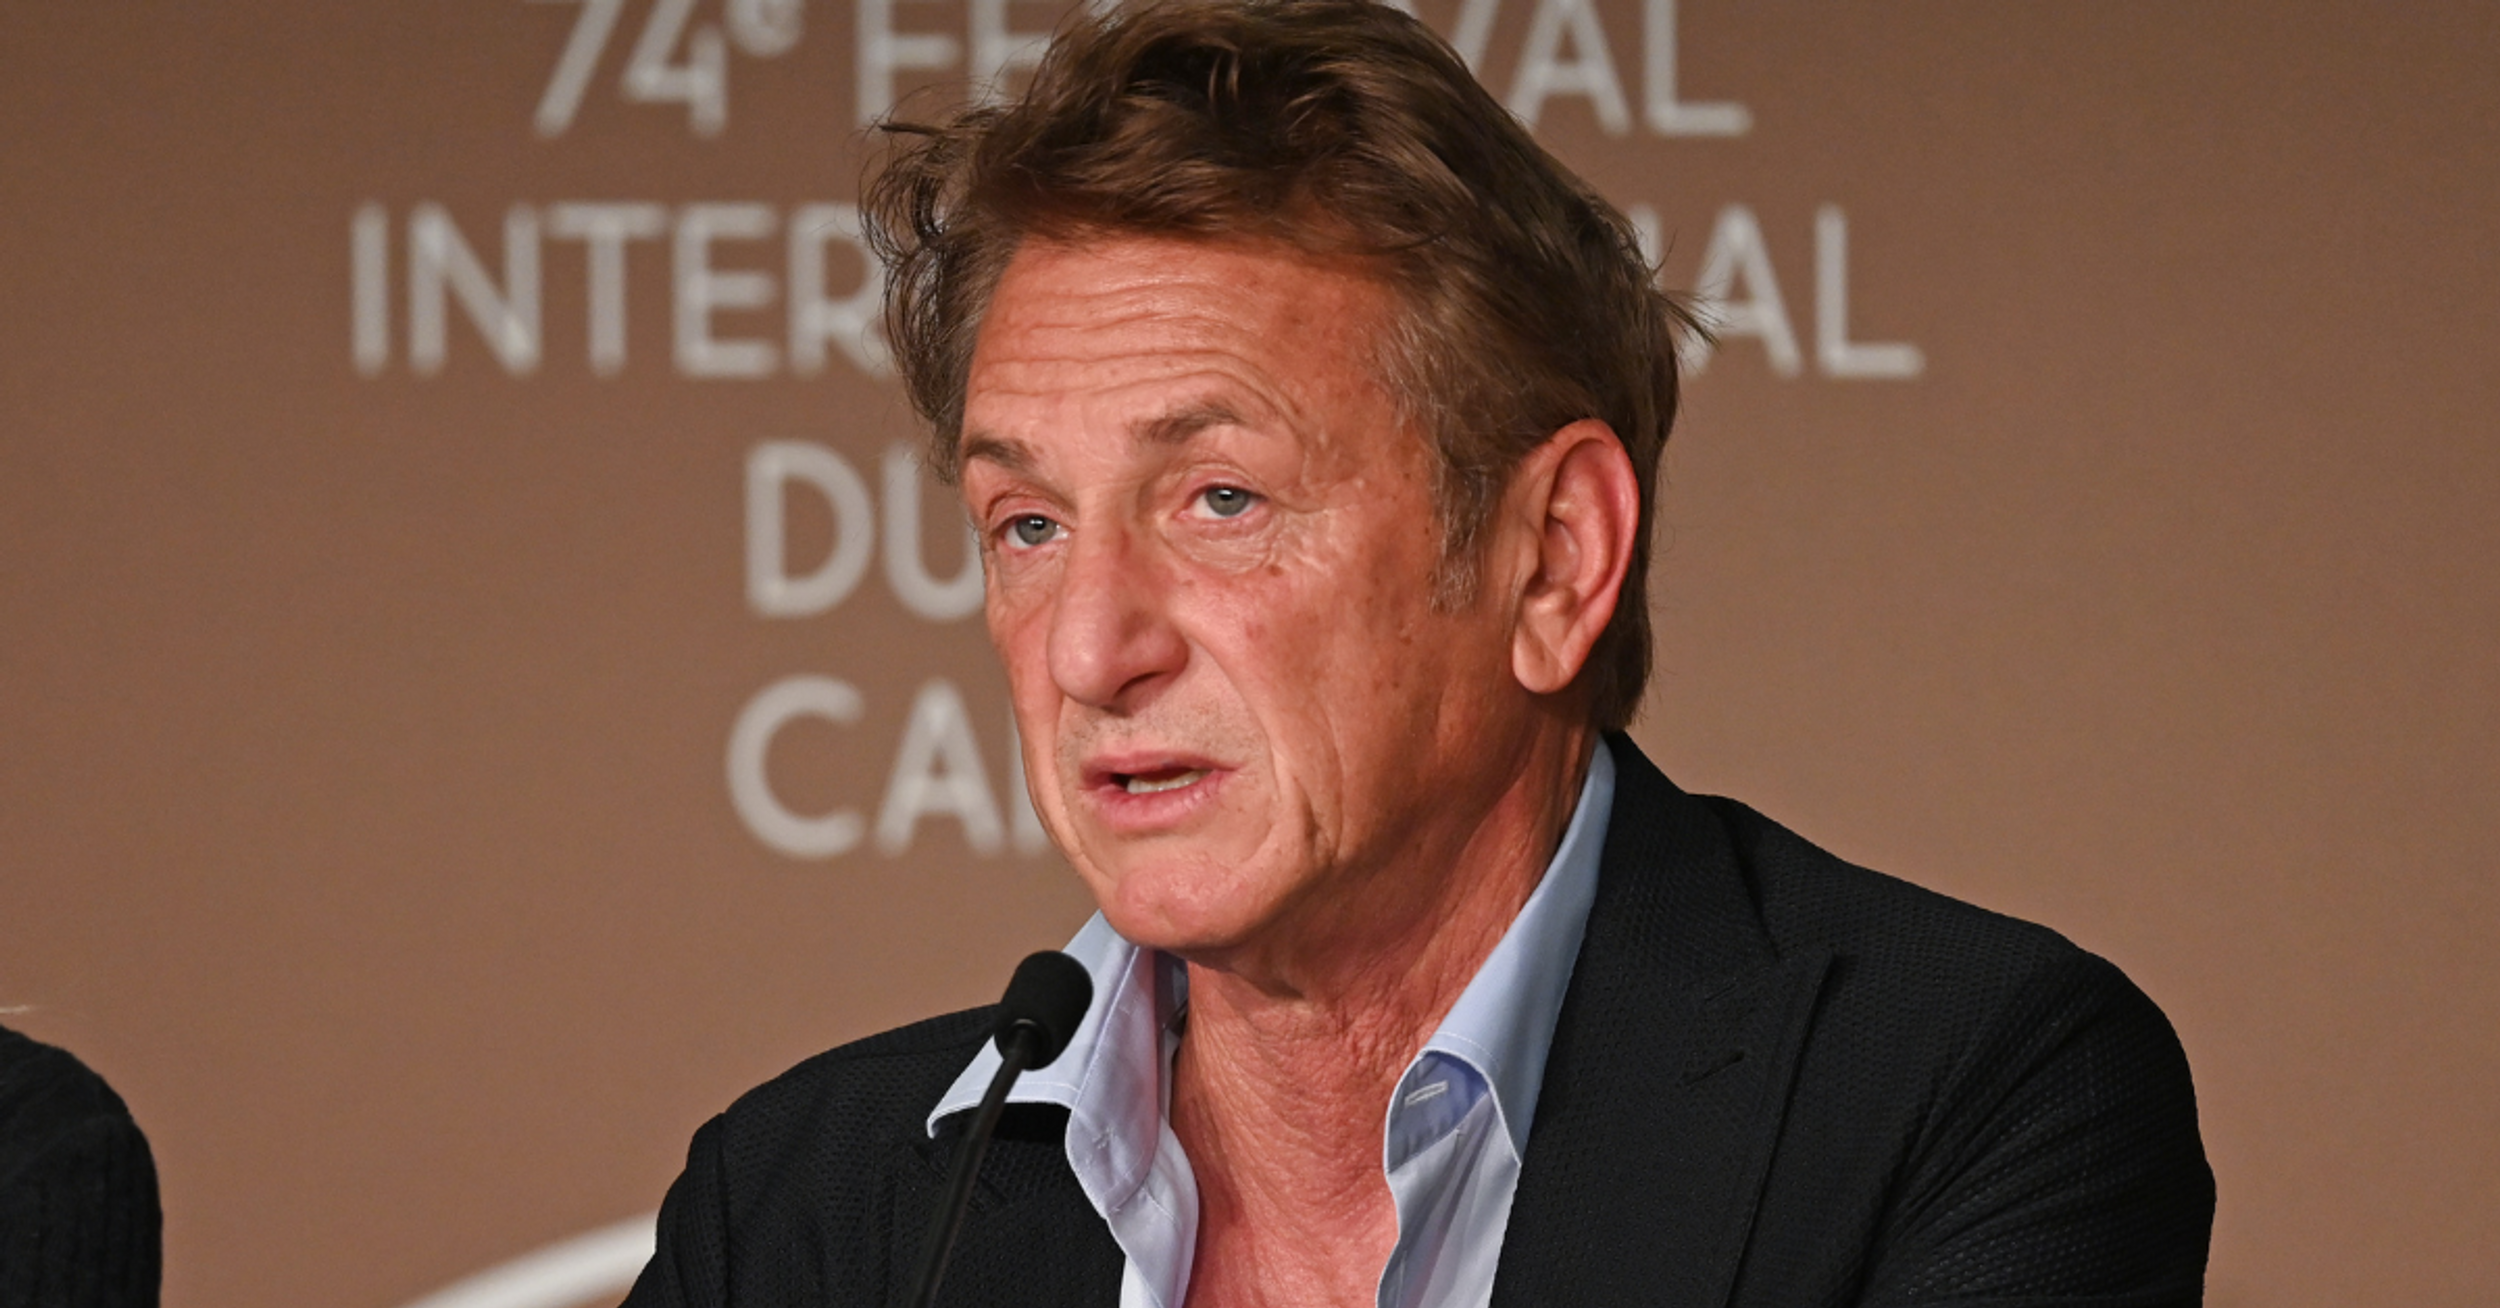 Sean Penn Ripped For Lamenting That American Men Have Become 'Feminized' Due To 'Cowardly Genes'